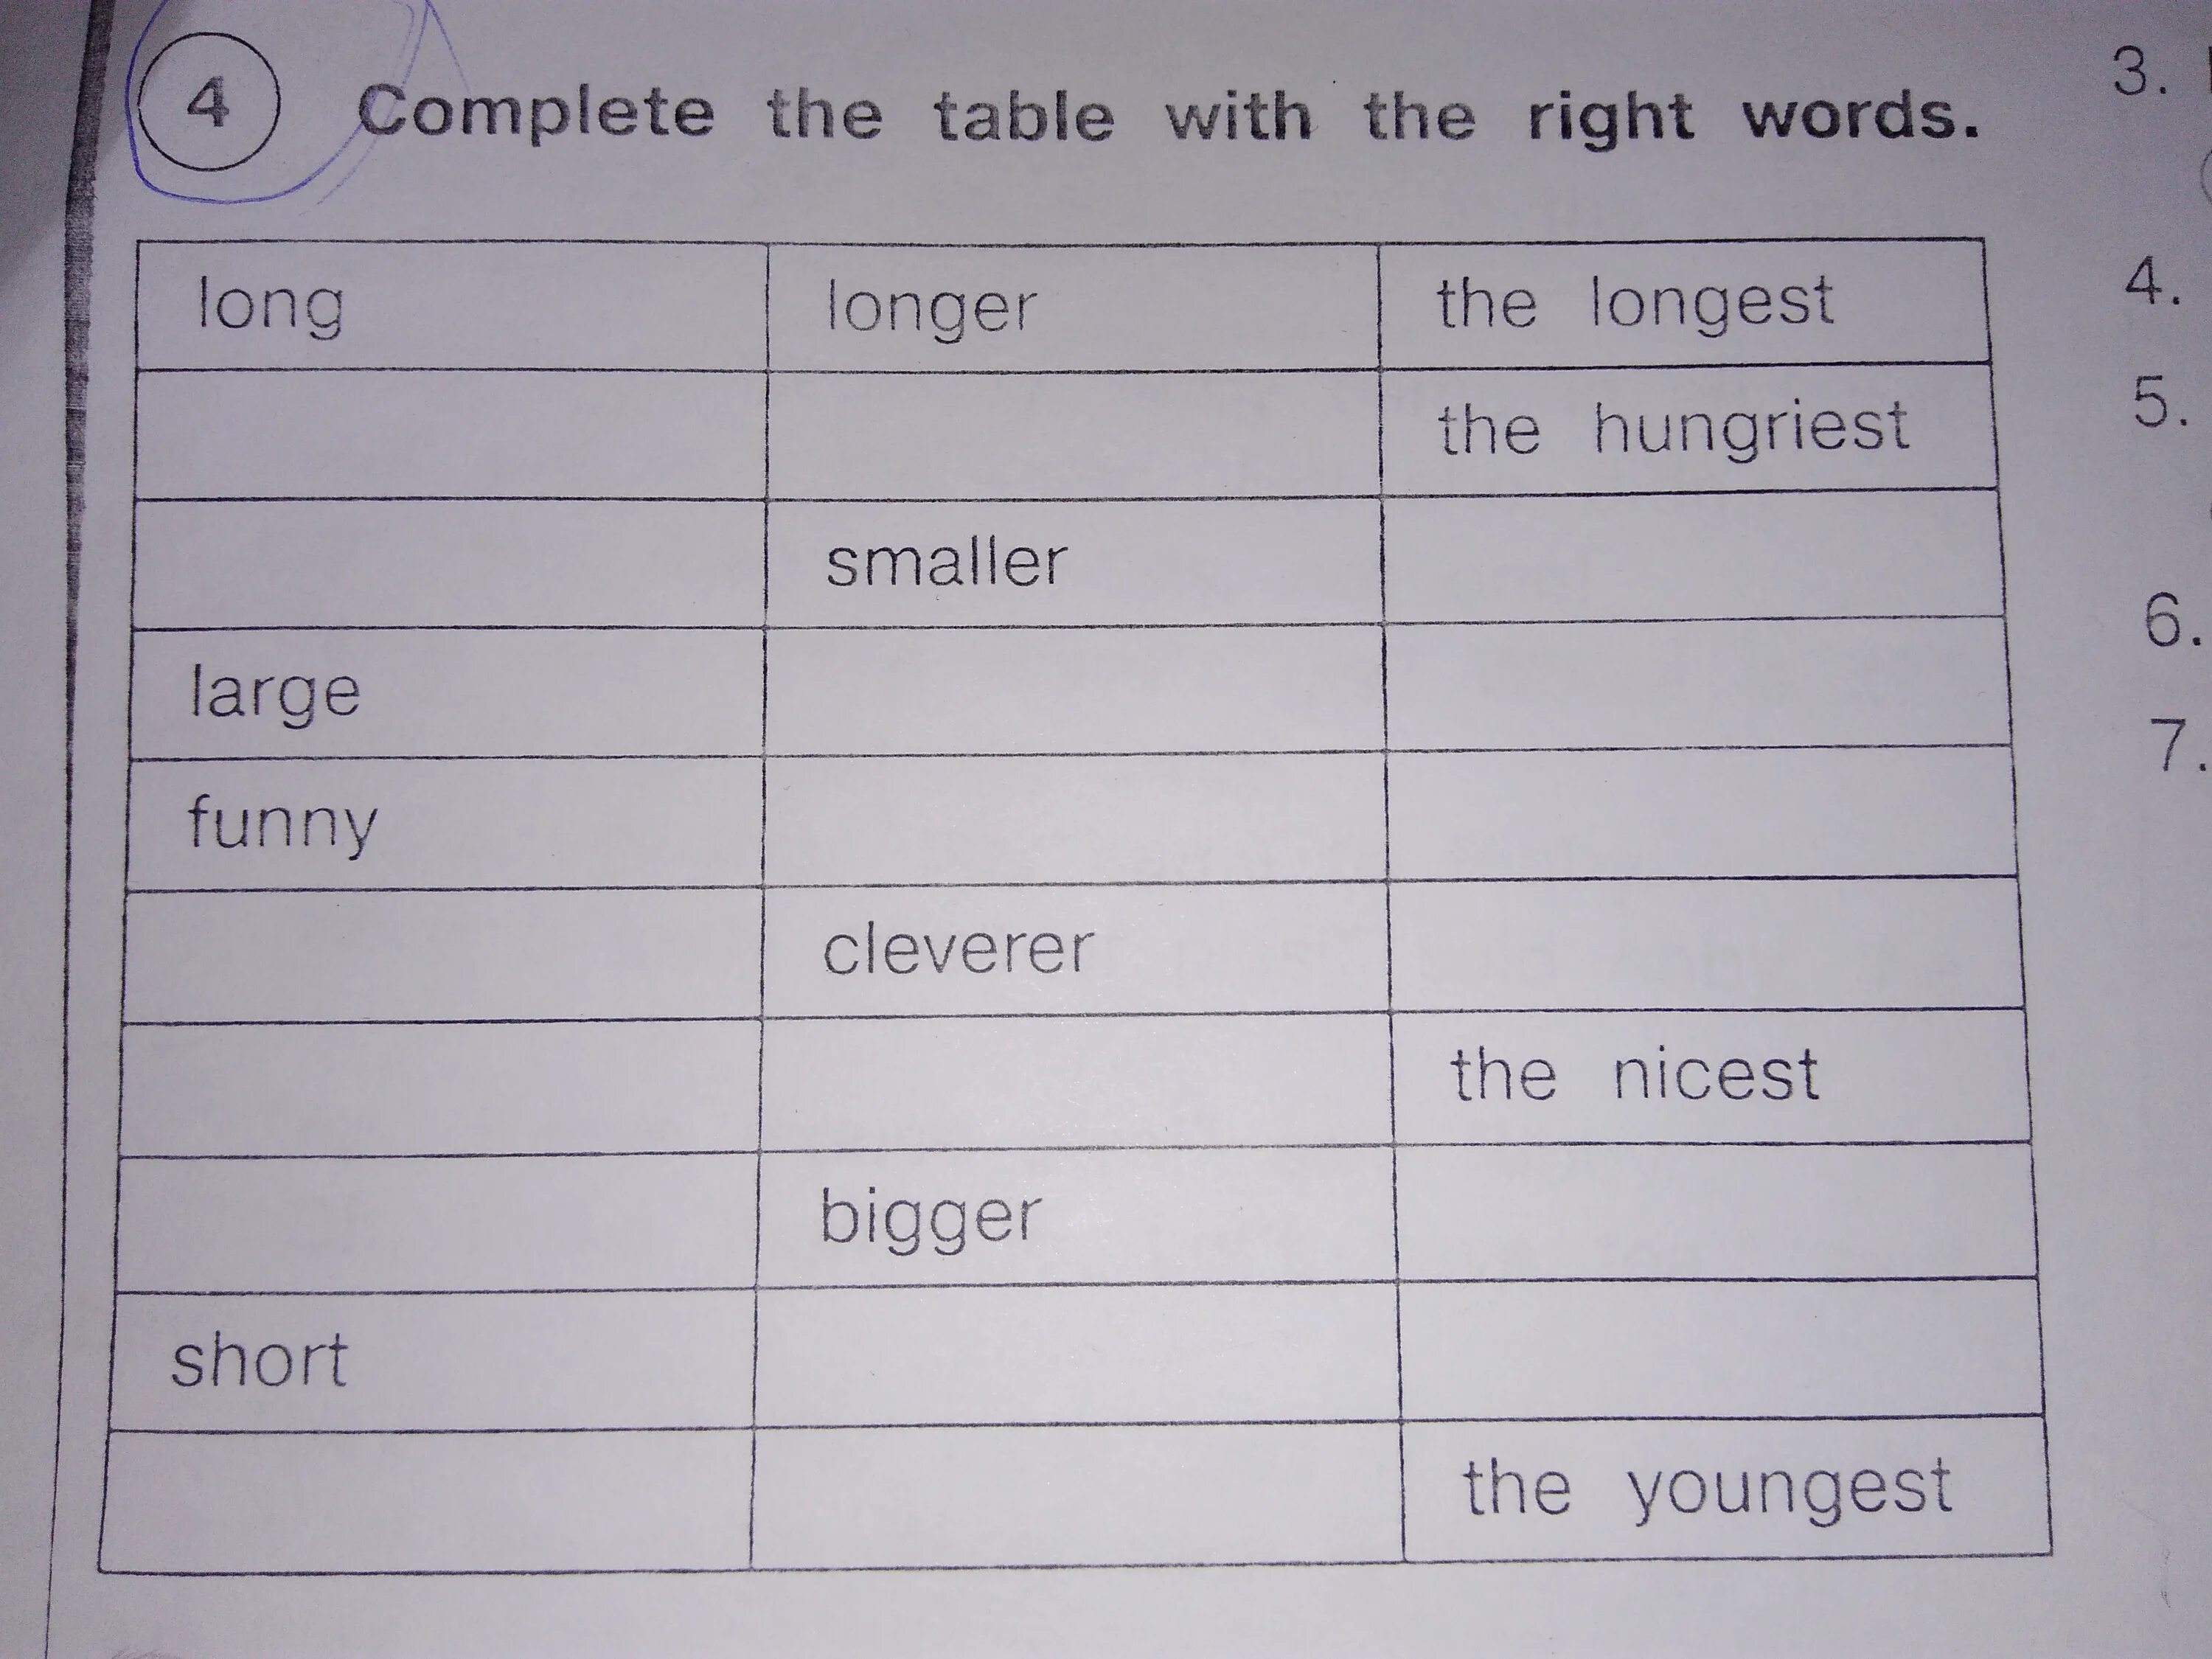 Английский язык complete the Table. Complete the Table таблица. Long longer the longest таблица. Complete the Table таблица ответы.